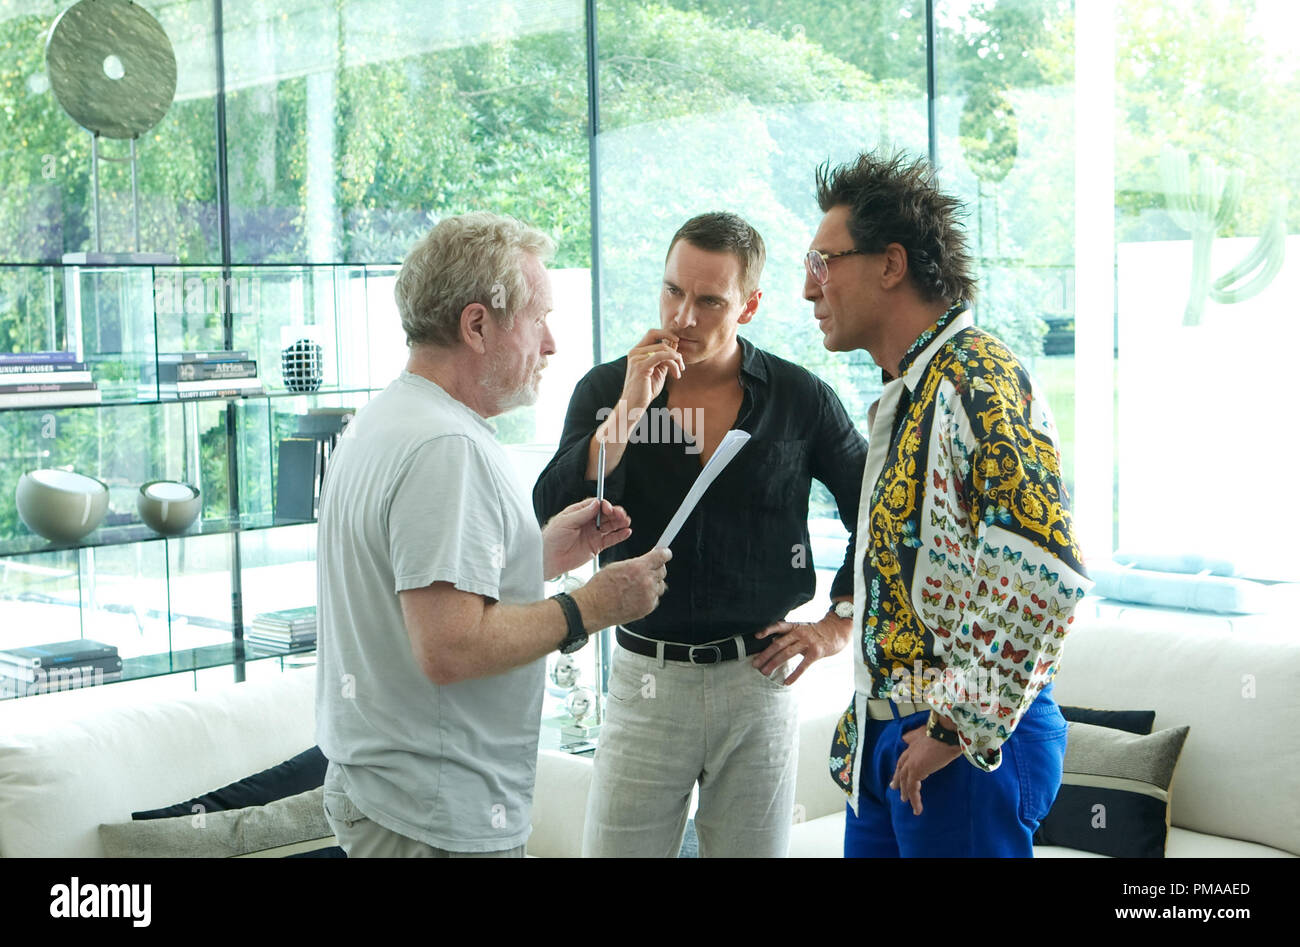 Director Ridley Scott (left) discusses a scene with Michael Fassbender and Javier Bardem on the set of THE COUNSELOR. Stock Photo